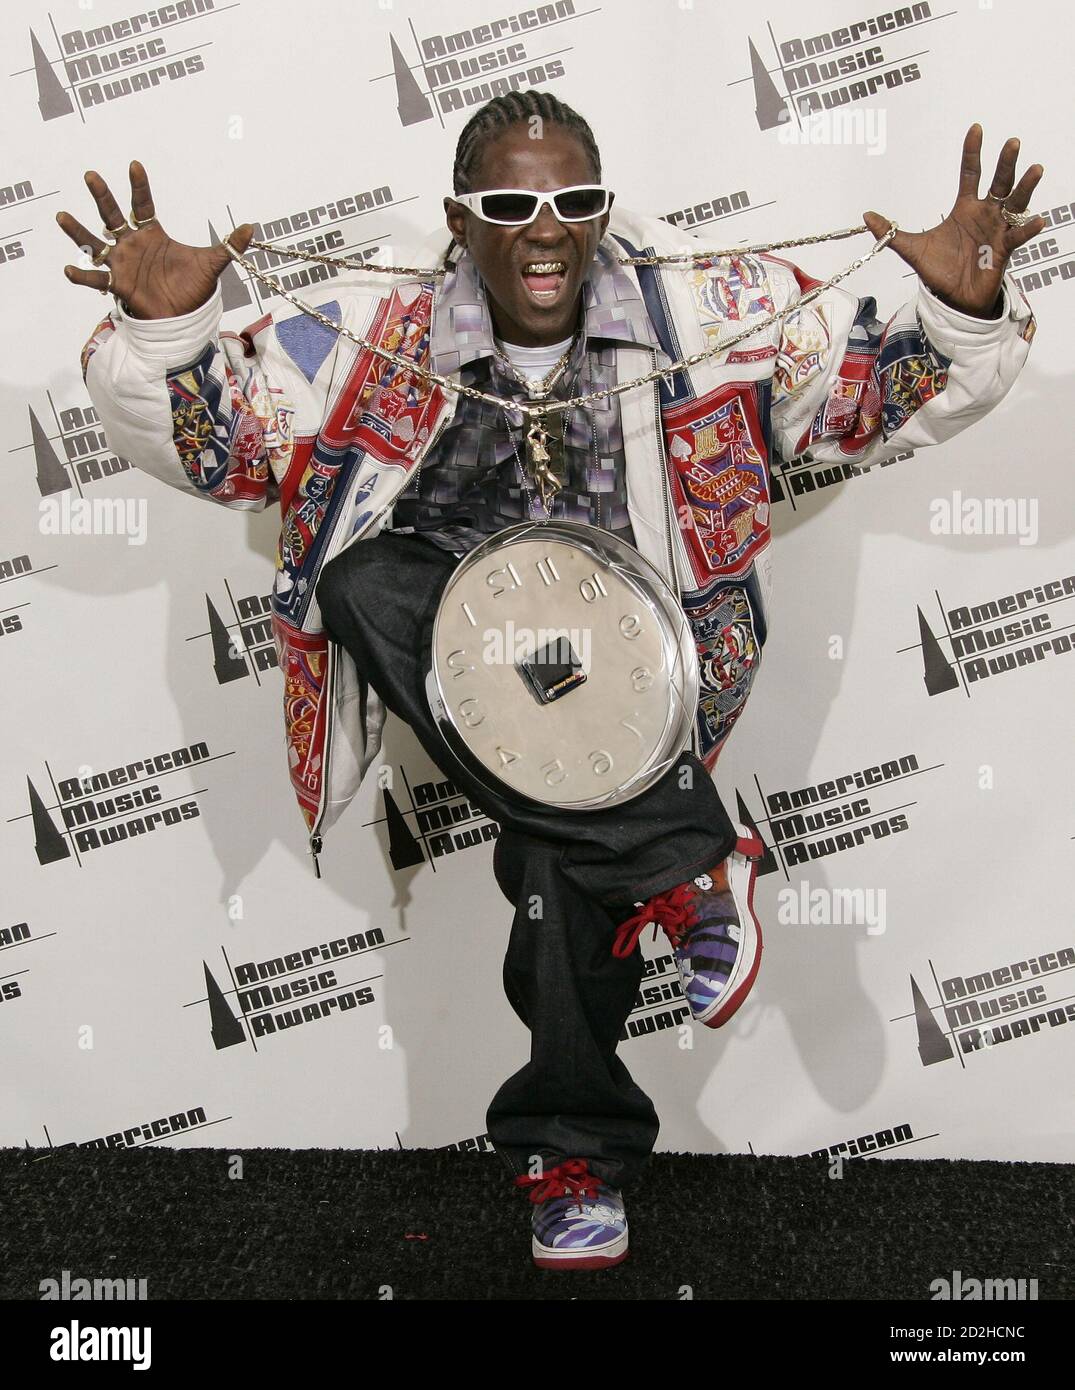 Musician Flavor Flav poses backstage at the 2006 American Music Awards November 21, 2006 in Los Angeles.  REUTERS/Lucy Nicholson    (UNITED STATES) Stock Photo